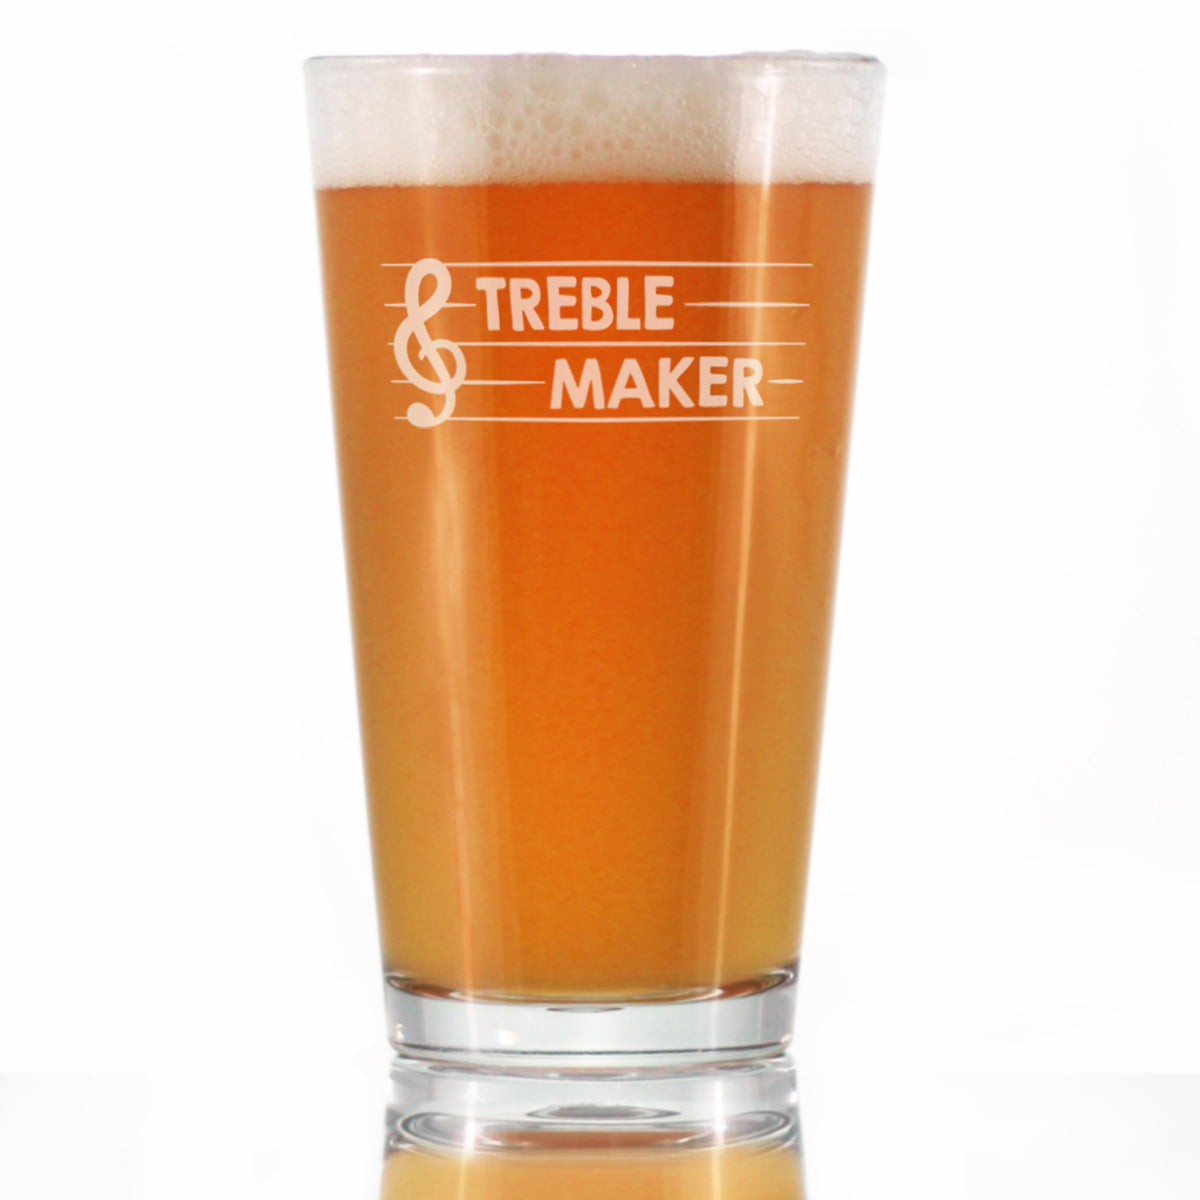 Treble Maker - Pint Glass for Beer - Cute Funny Music Teacher Gifts for Women and Men - Fun Unique Musical Decor